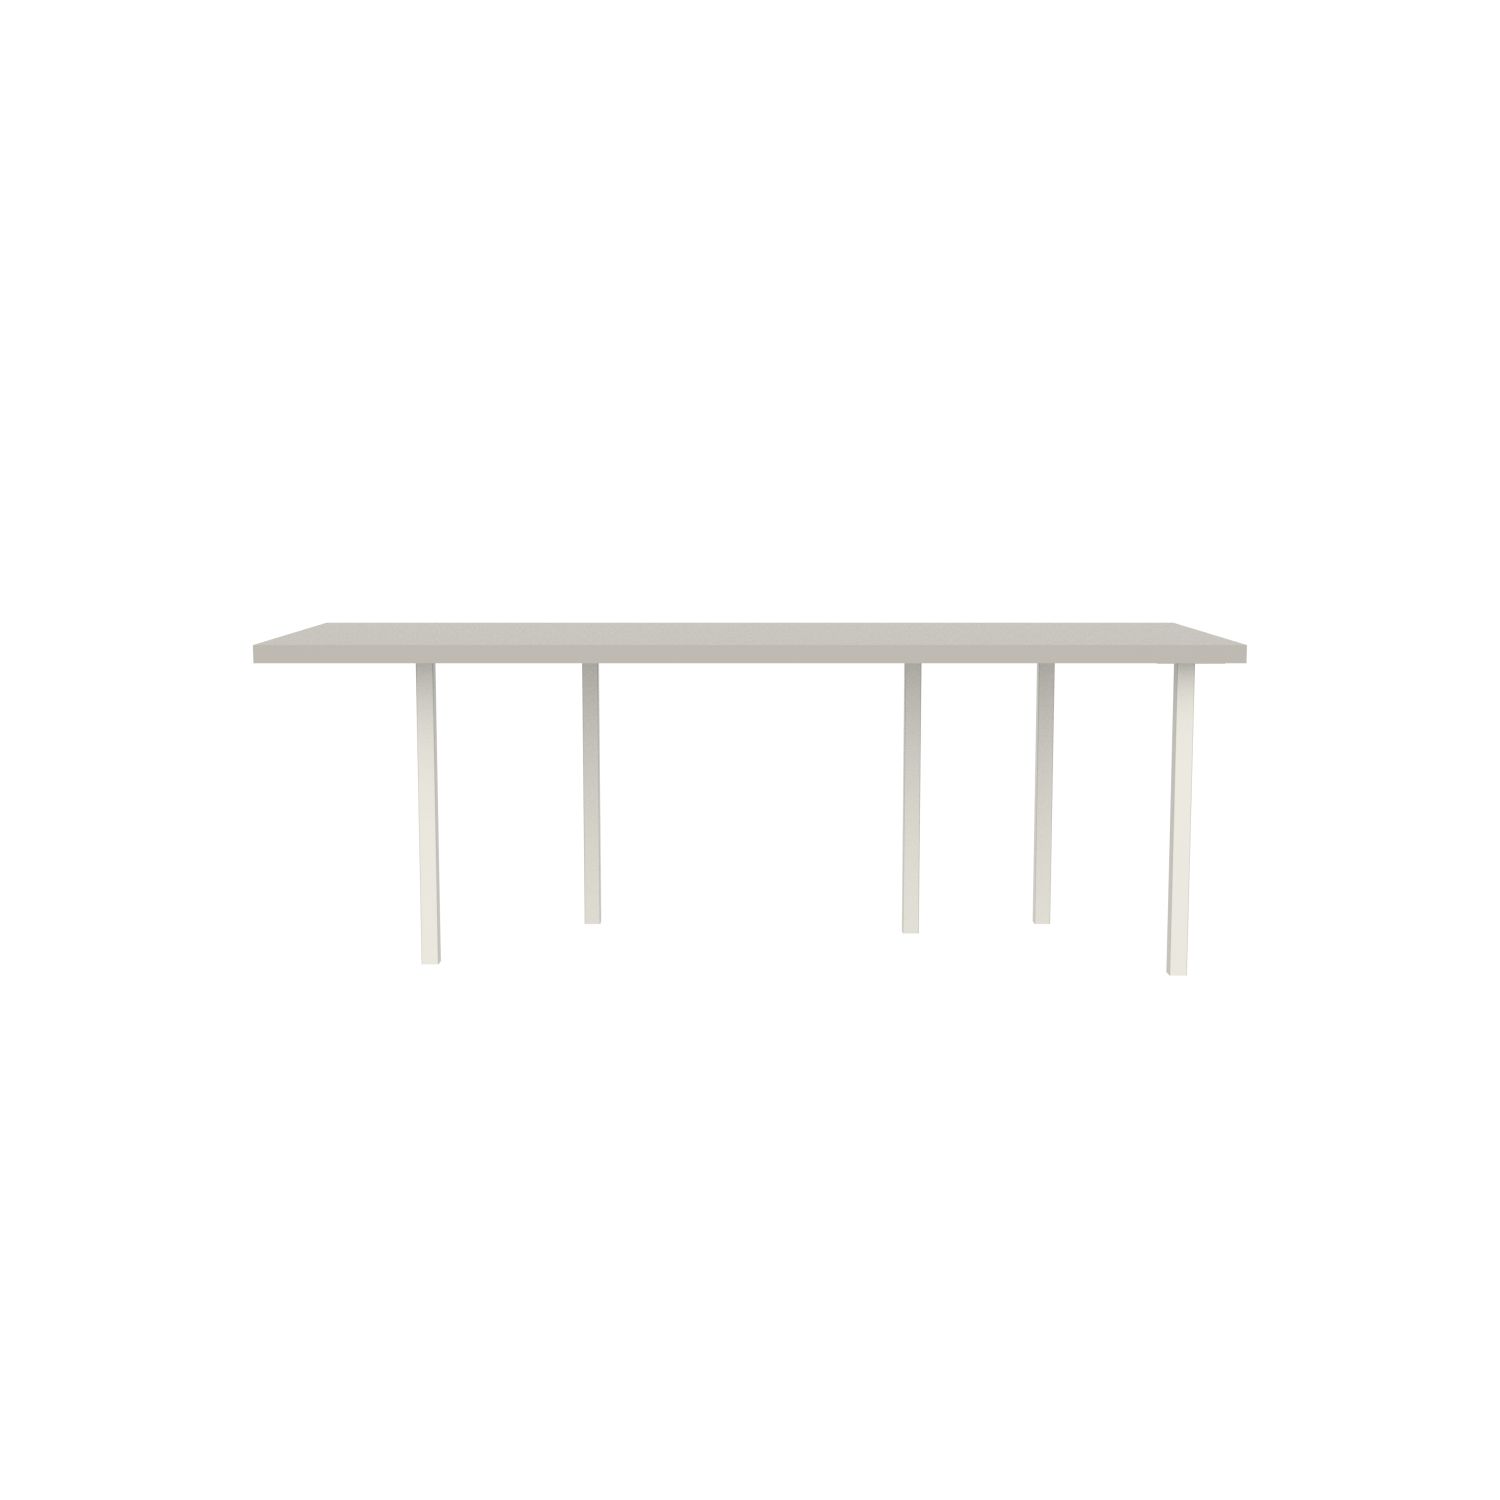 lensvelt bbrand table five fixed heigt 80x218 hpl white 50 mm price level 1 white ral9010